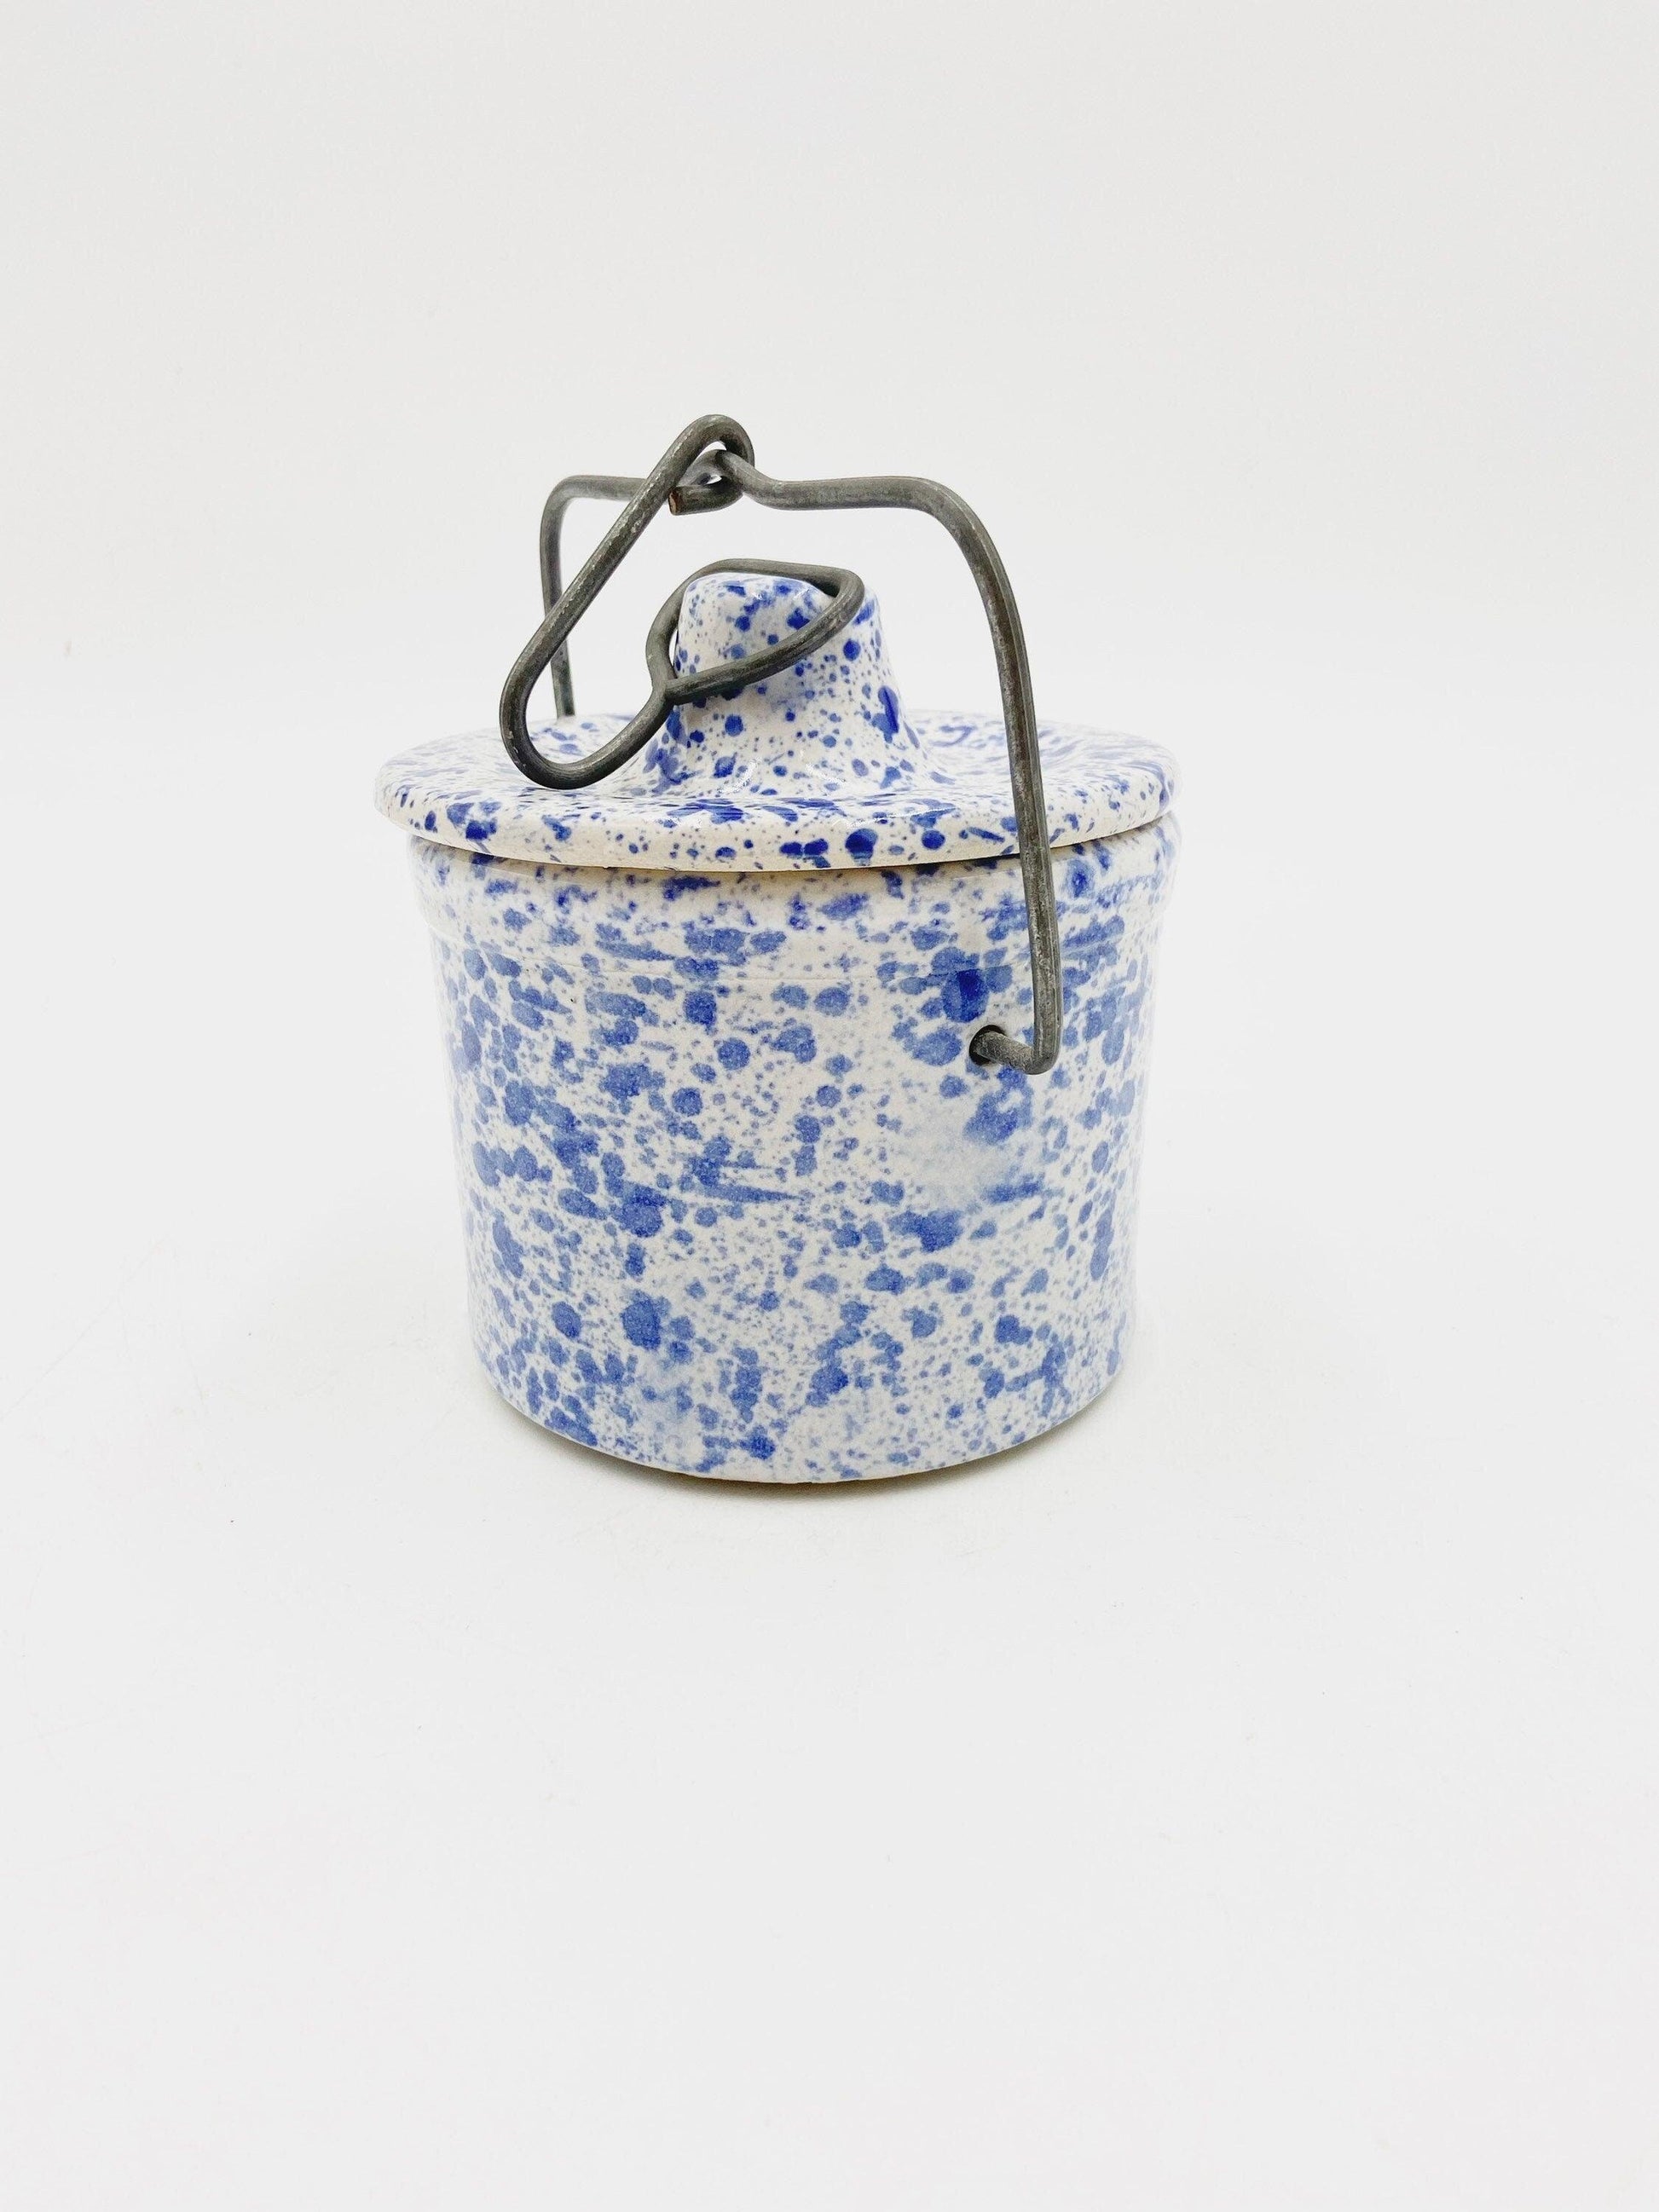 https://funkyhousevintage.com/cdn/shop/files/small-vintage-stoneware-white-with-blue-speckles-crock-canister-with-metal-wire-ceramic-kitchen-storage-decor-farmhouse-country-pottery-located-at-funkyhouse-vintage-antique-store-wei_c88fbcf5-ed60-4df4-bb04-80b9b4dc5738.jpg?v=1688594406&width=1946